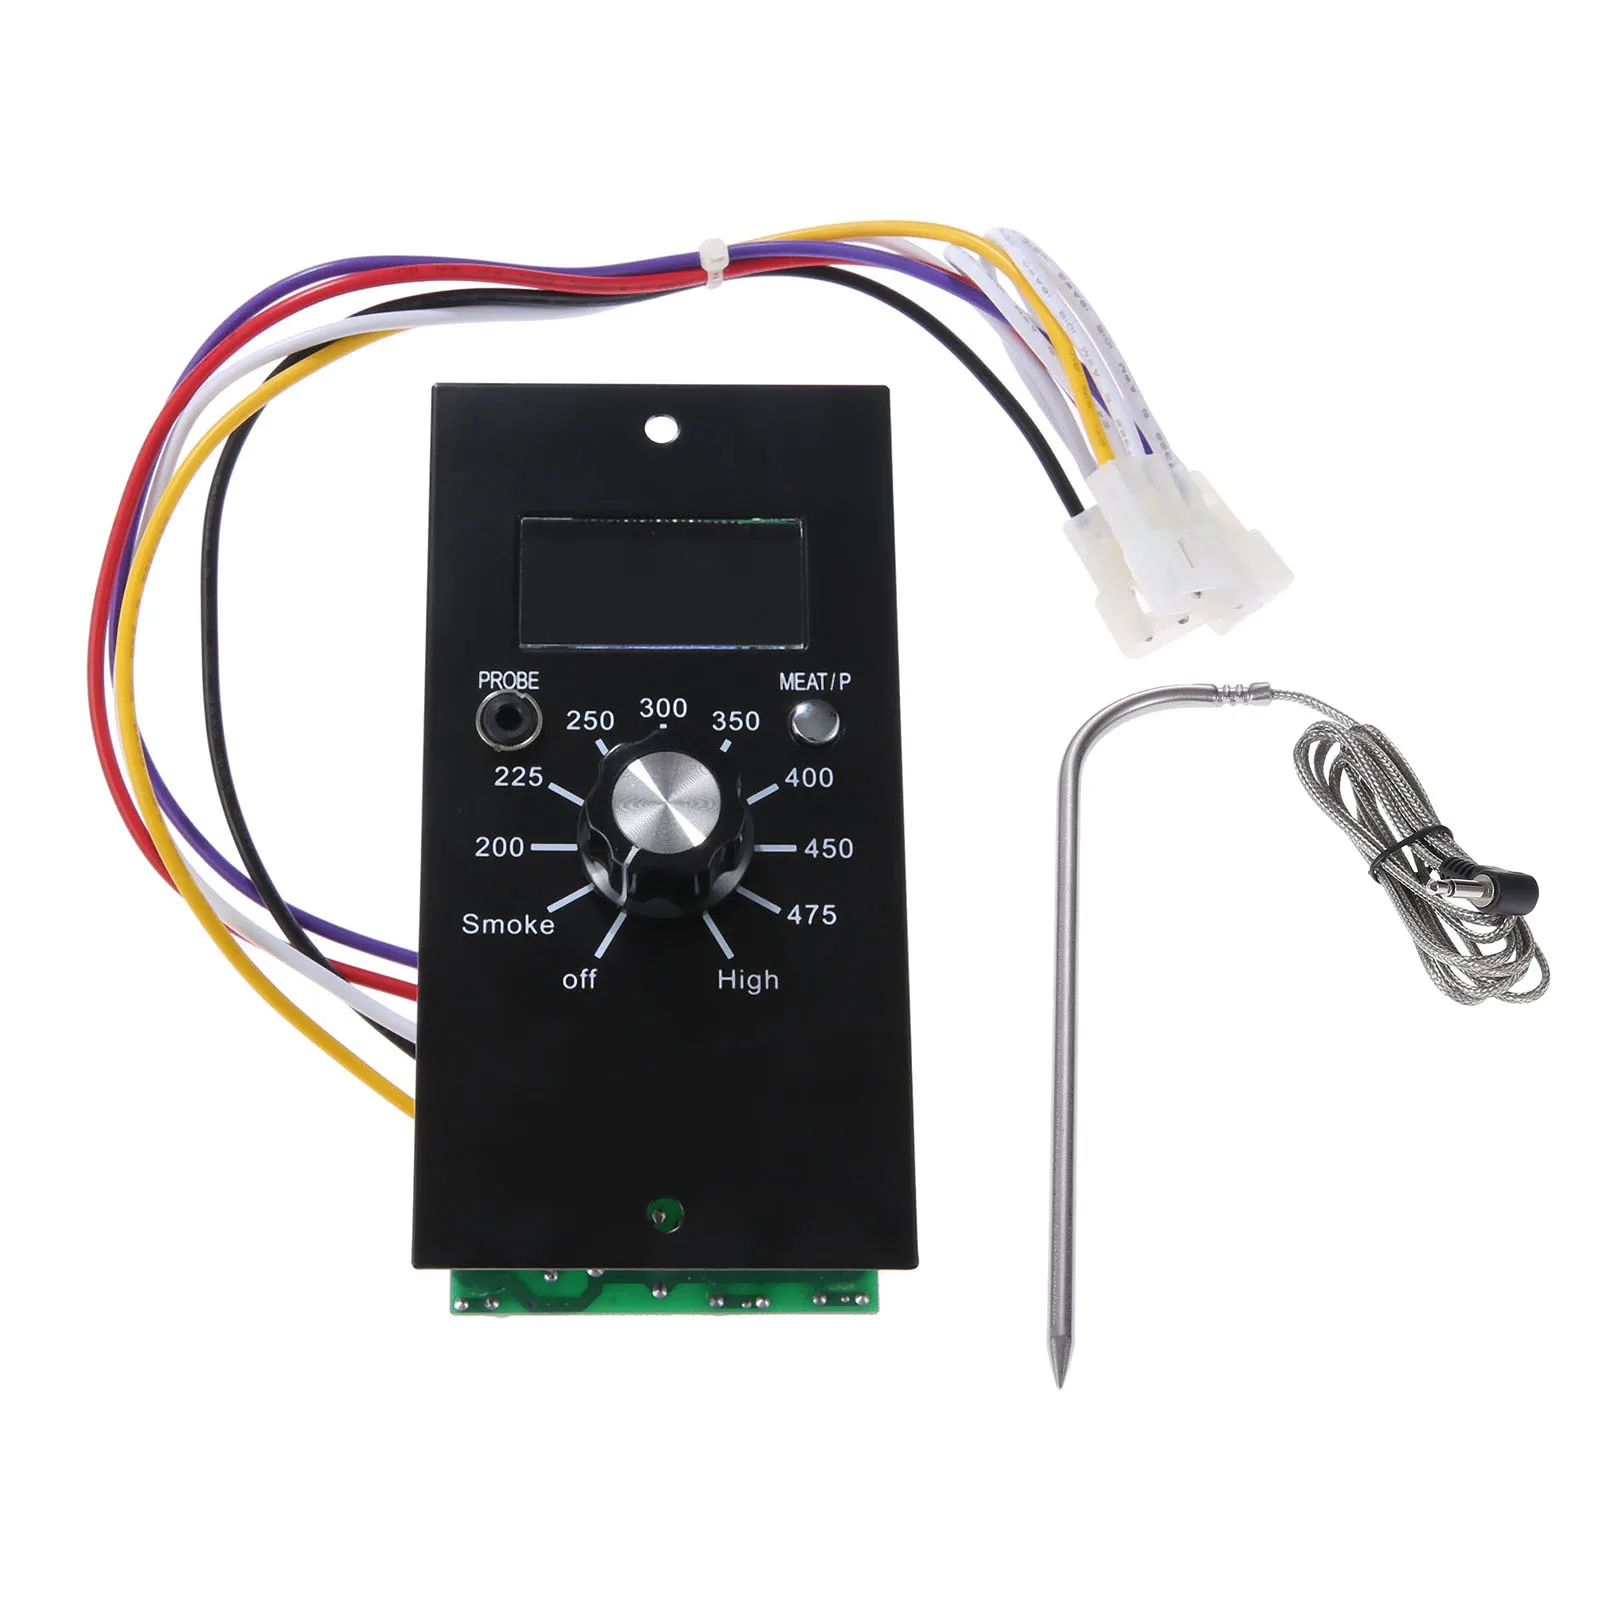 

AC 120V 60HZ Upgrade Digital Thermostat Control Board with BBQ Meat Temperature Probe Sensor Fit for Pit Boss Pellet Grill